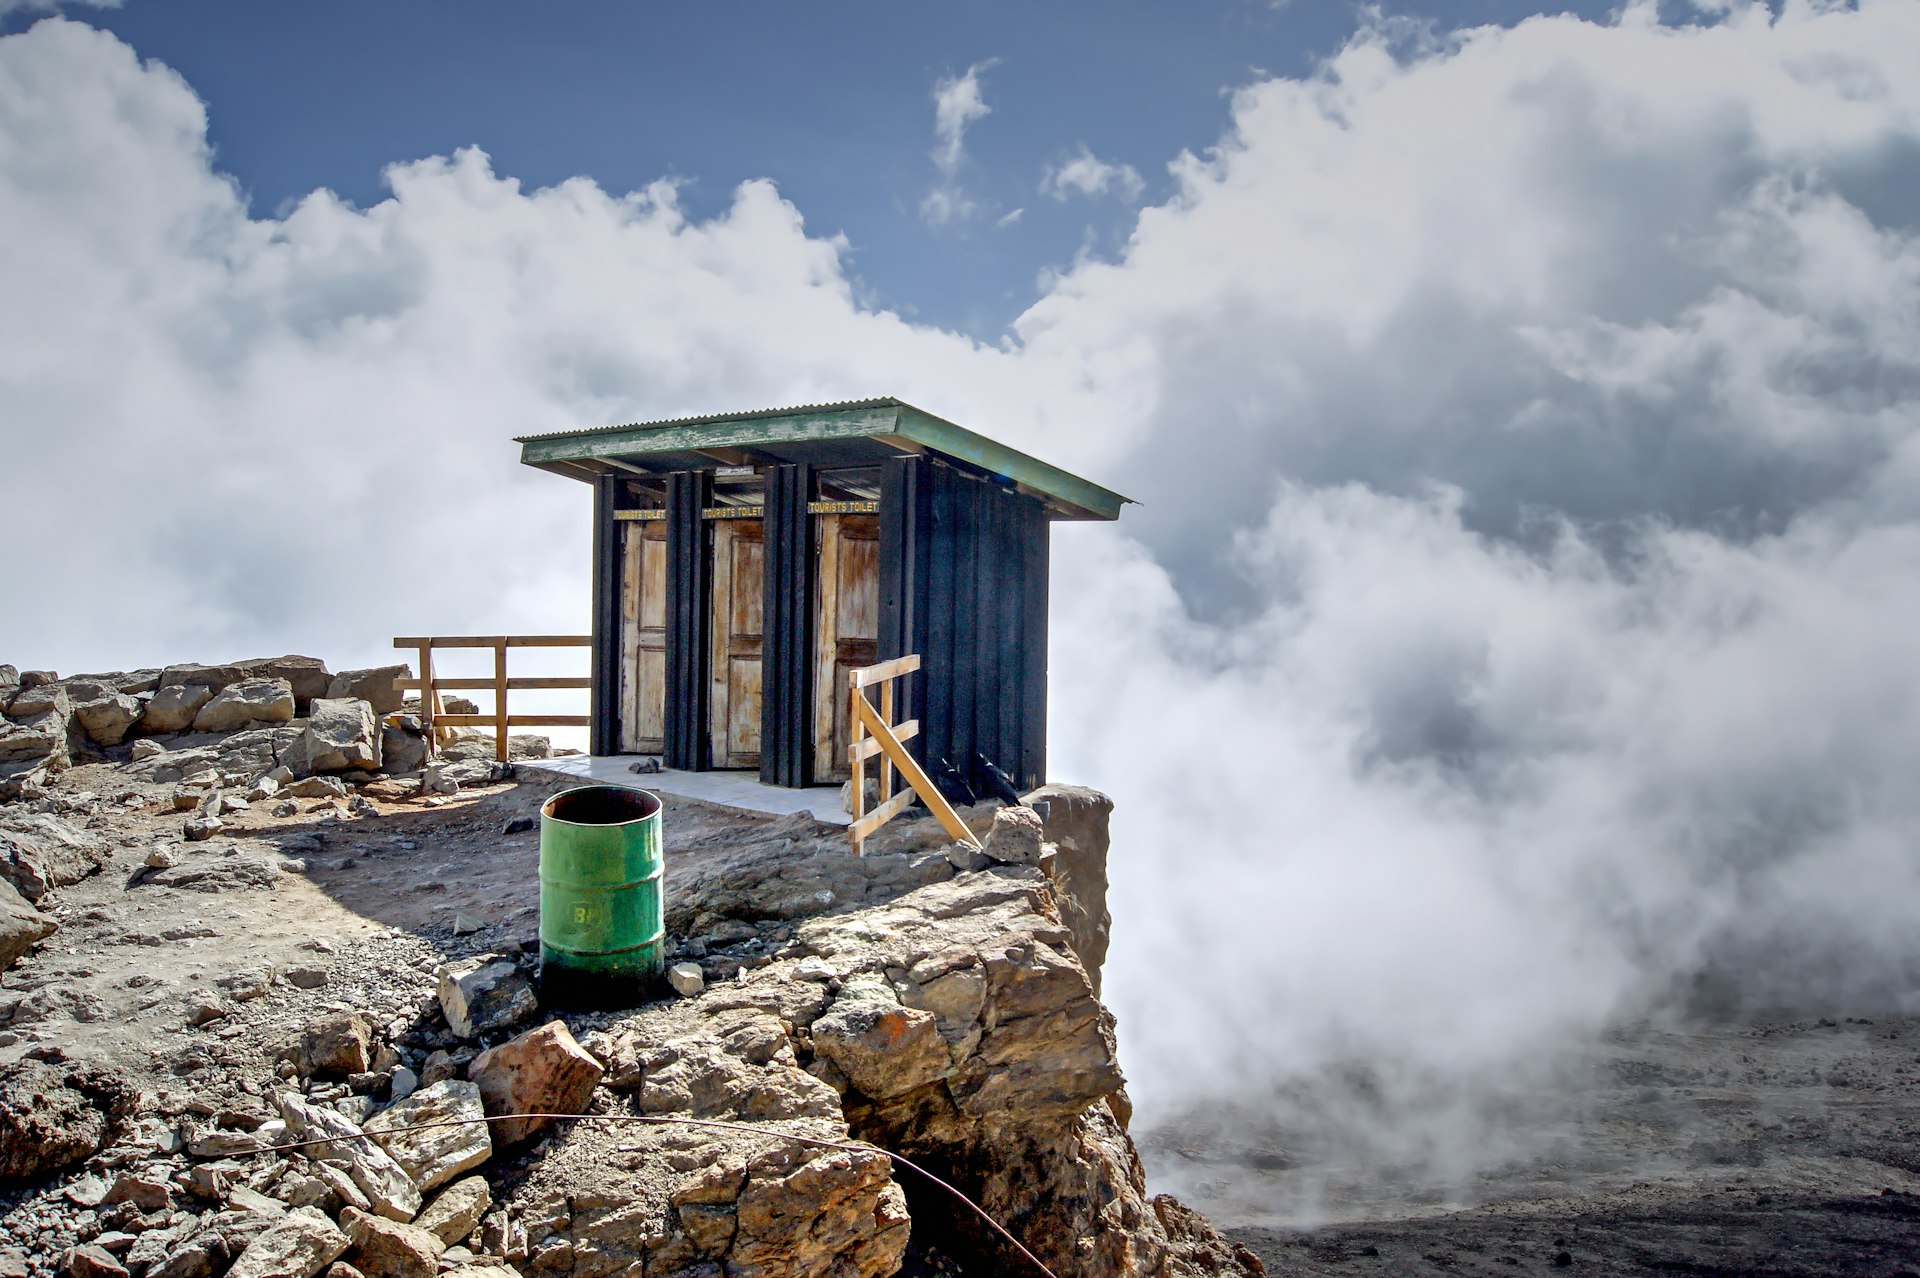 A toilet precipitously perched on the edge of a cliff